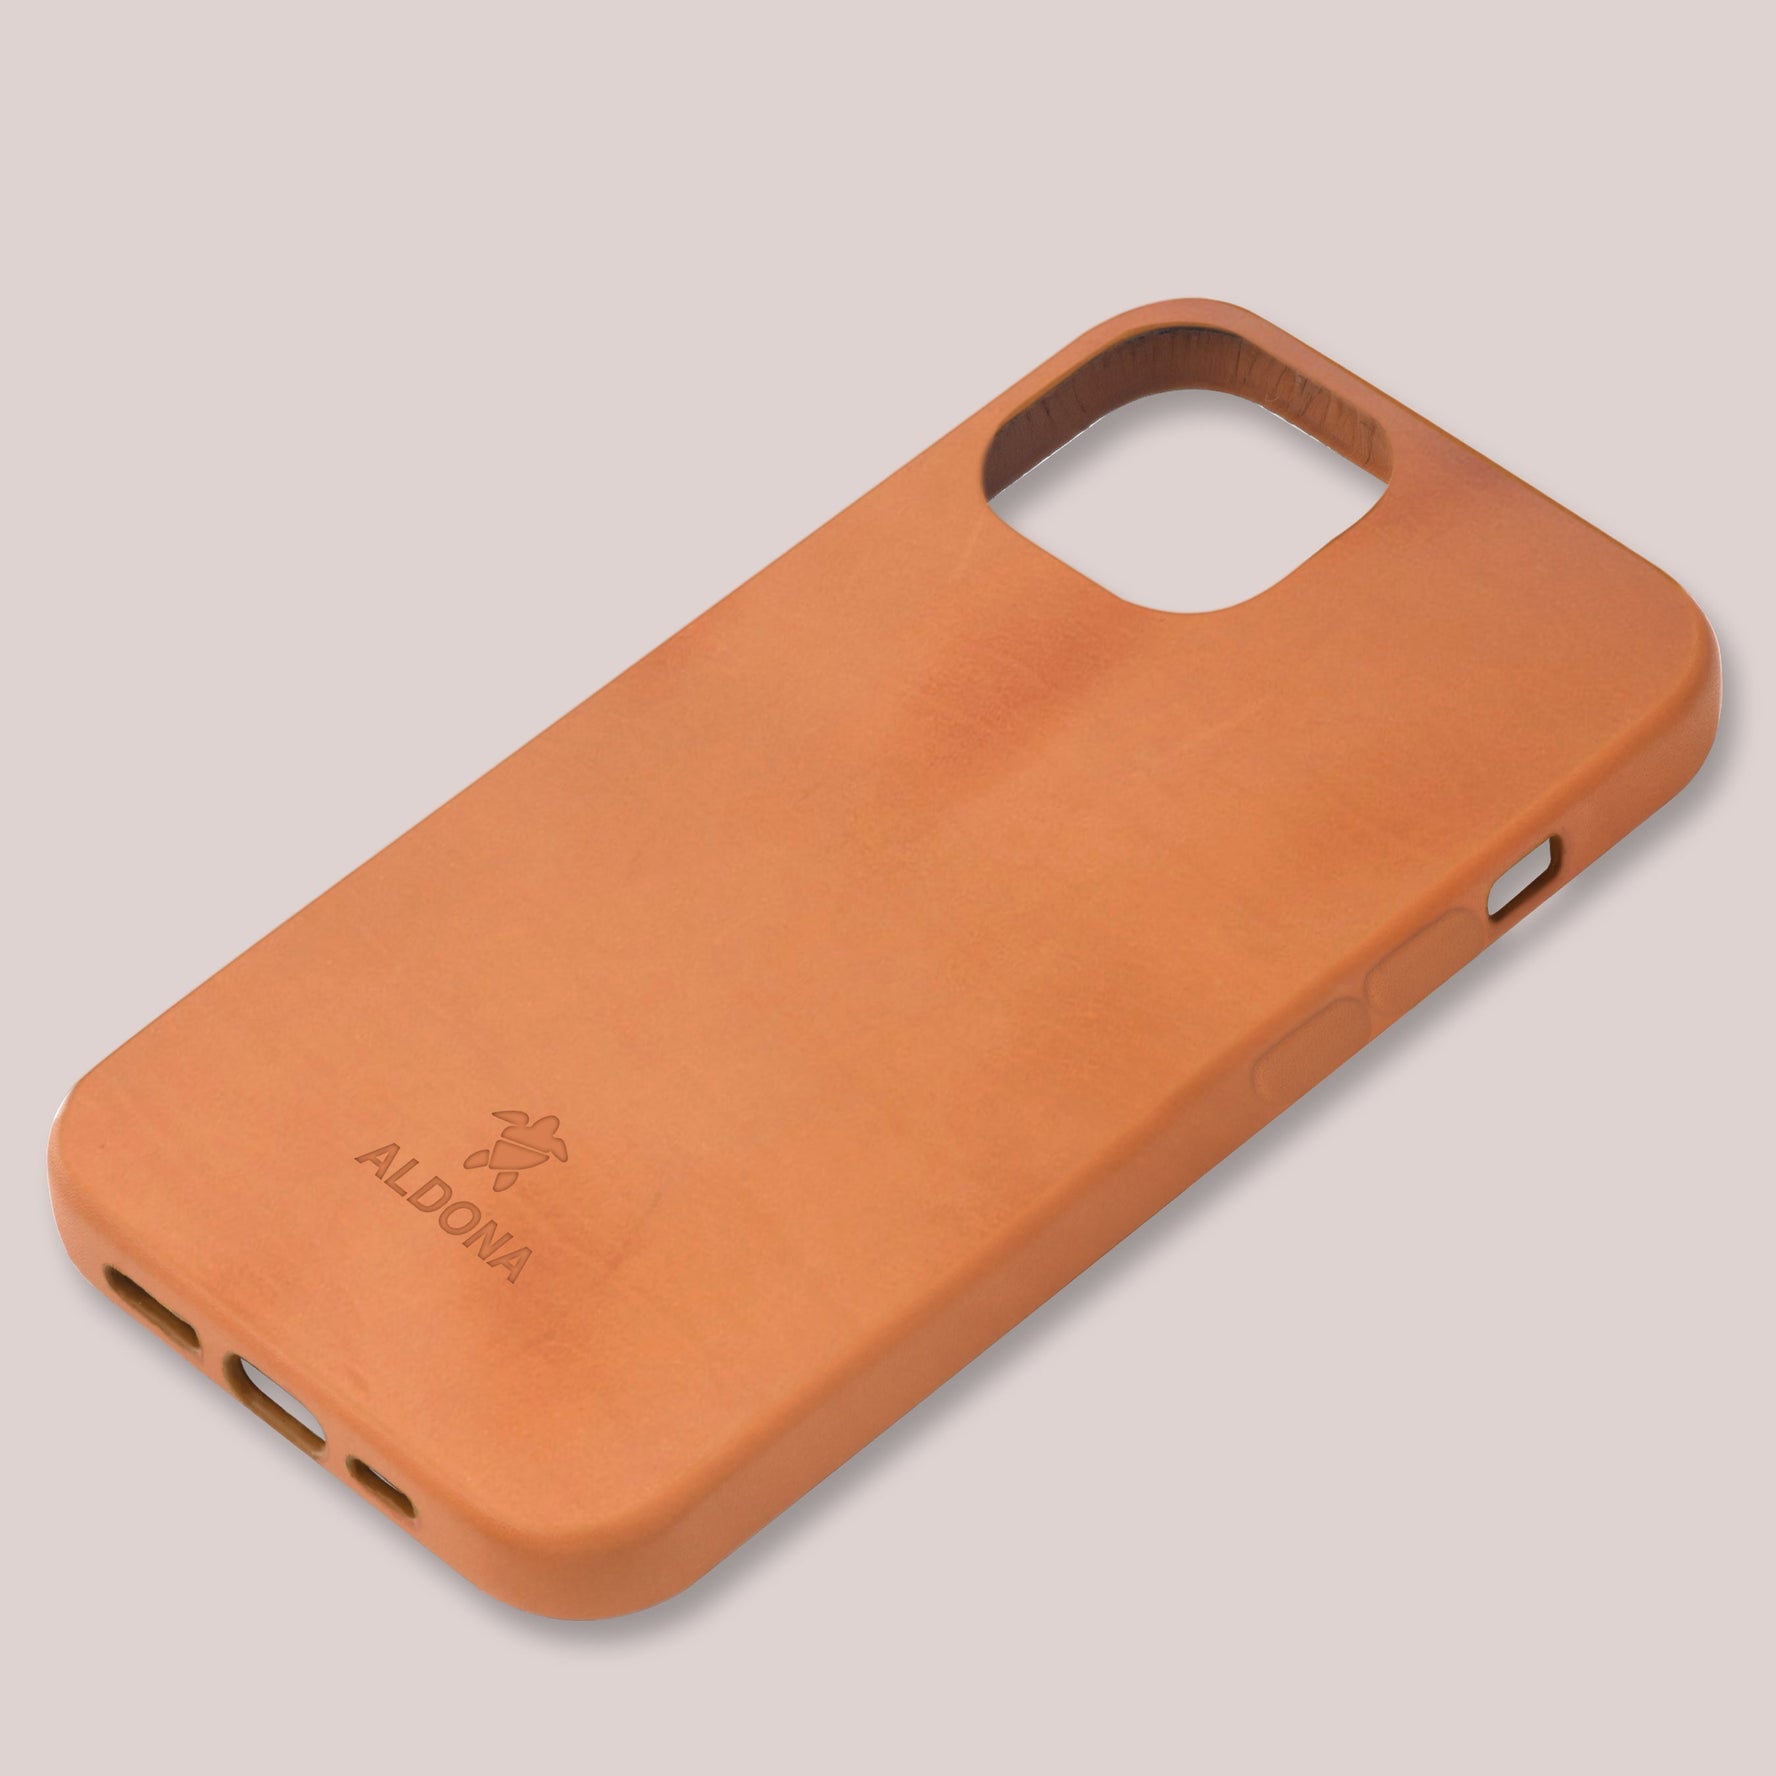 Kalon Case for iPhone 14 with MagSafe Compatibility - Vintage Tan